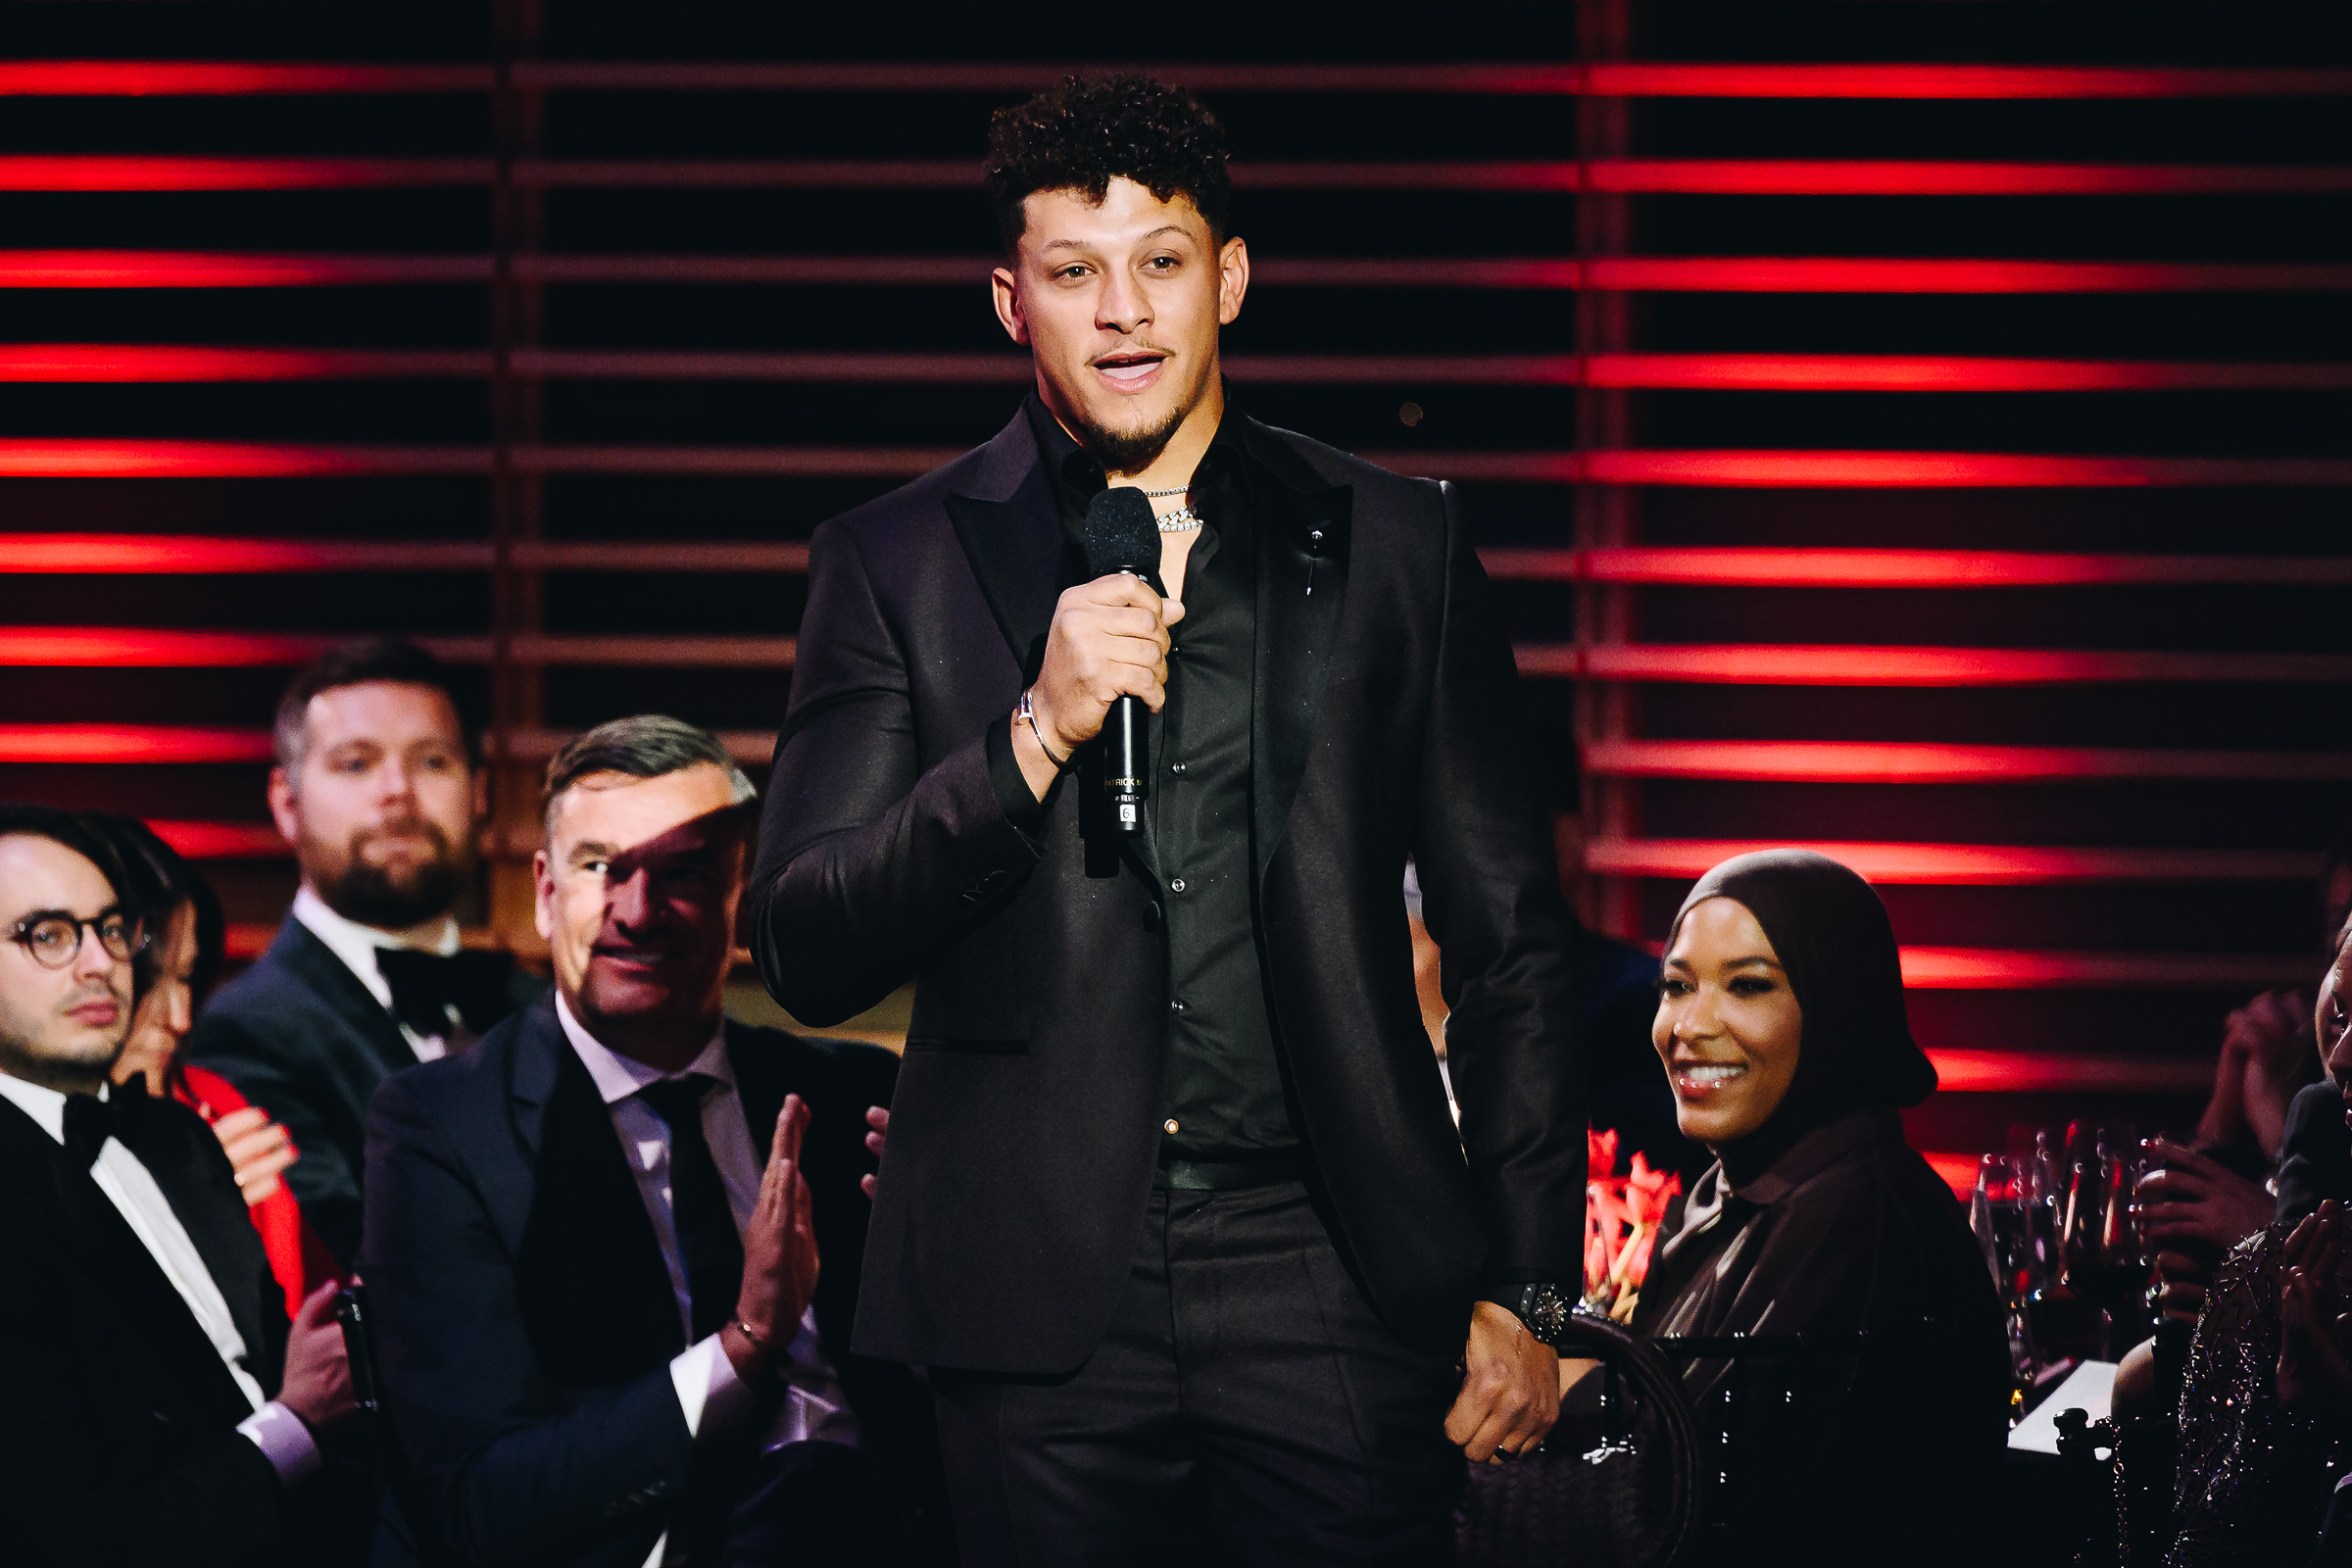 Patrick Mahomes speaks during a toast at the TIME 100 Gala